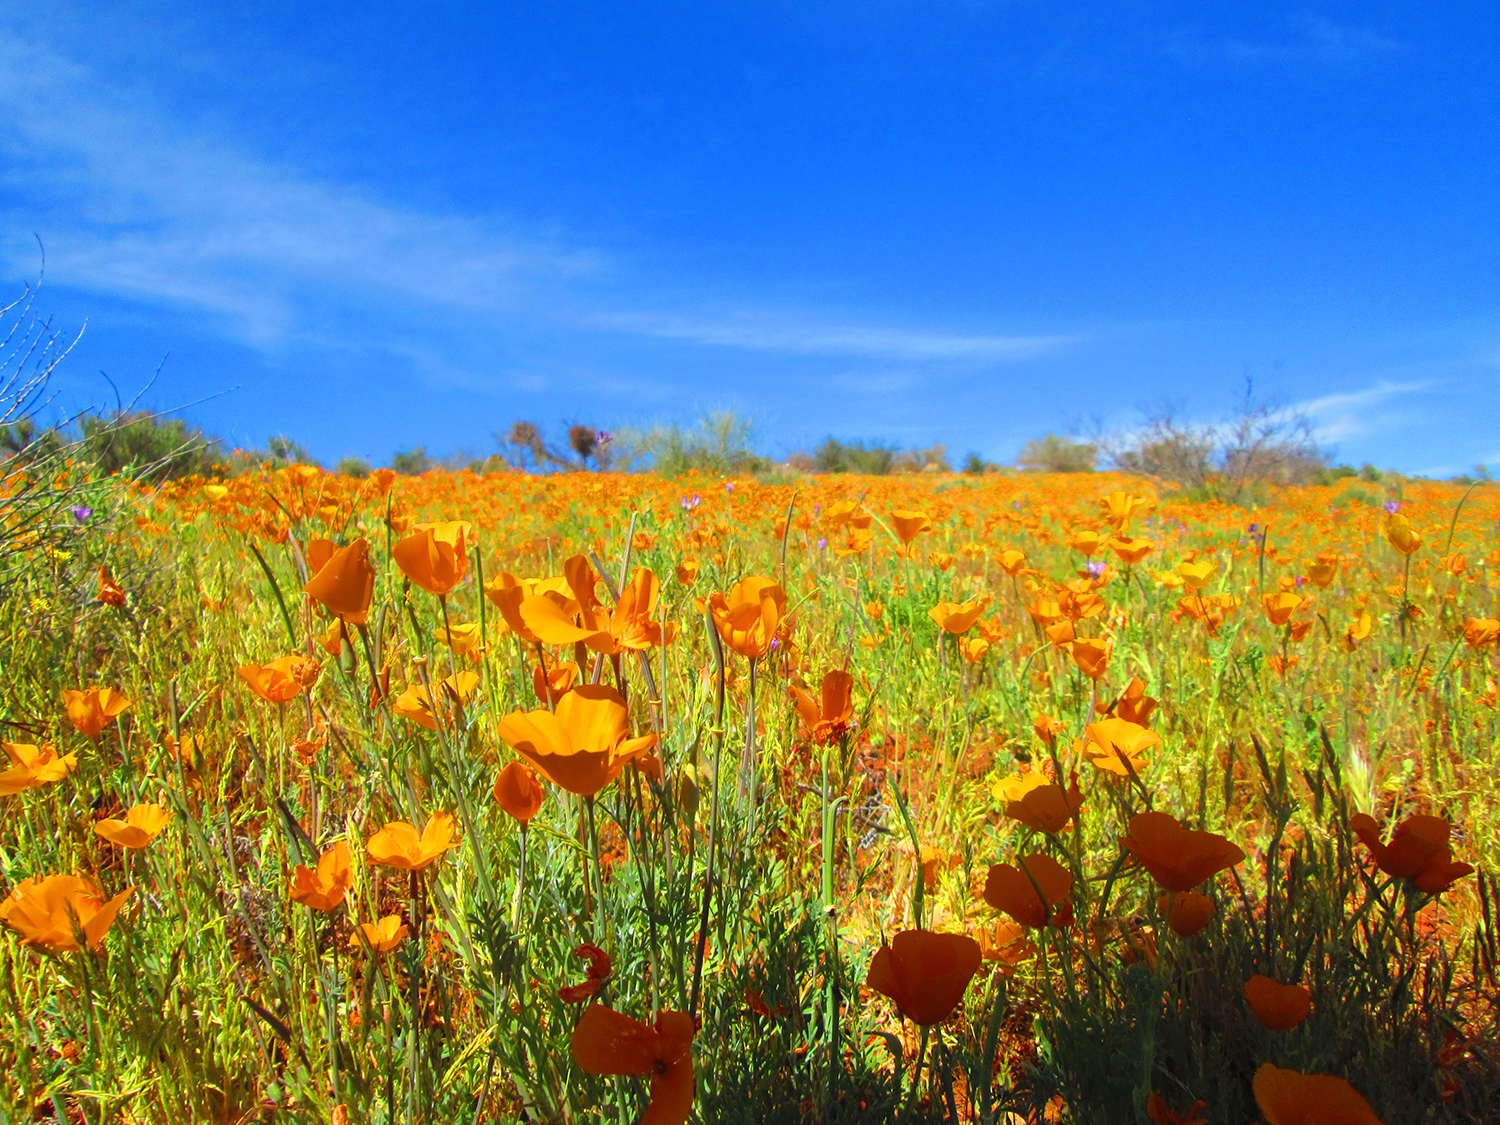 Experience the area’s vibrant poppy bloom the first weekend of April